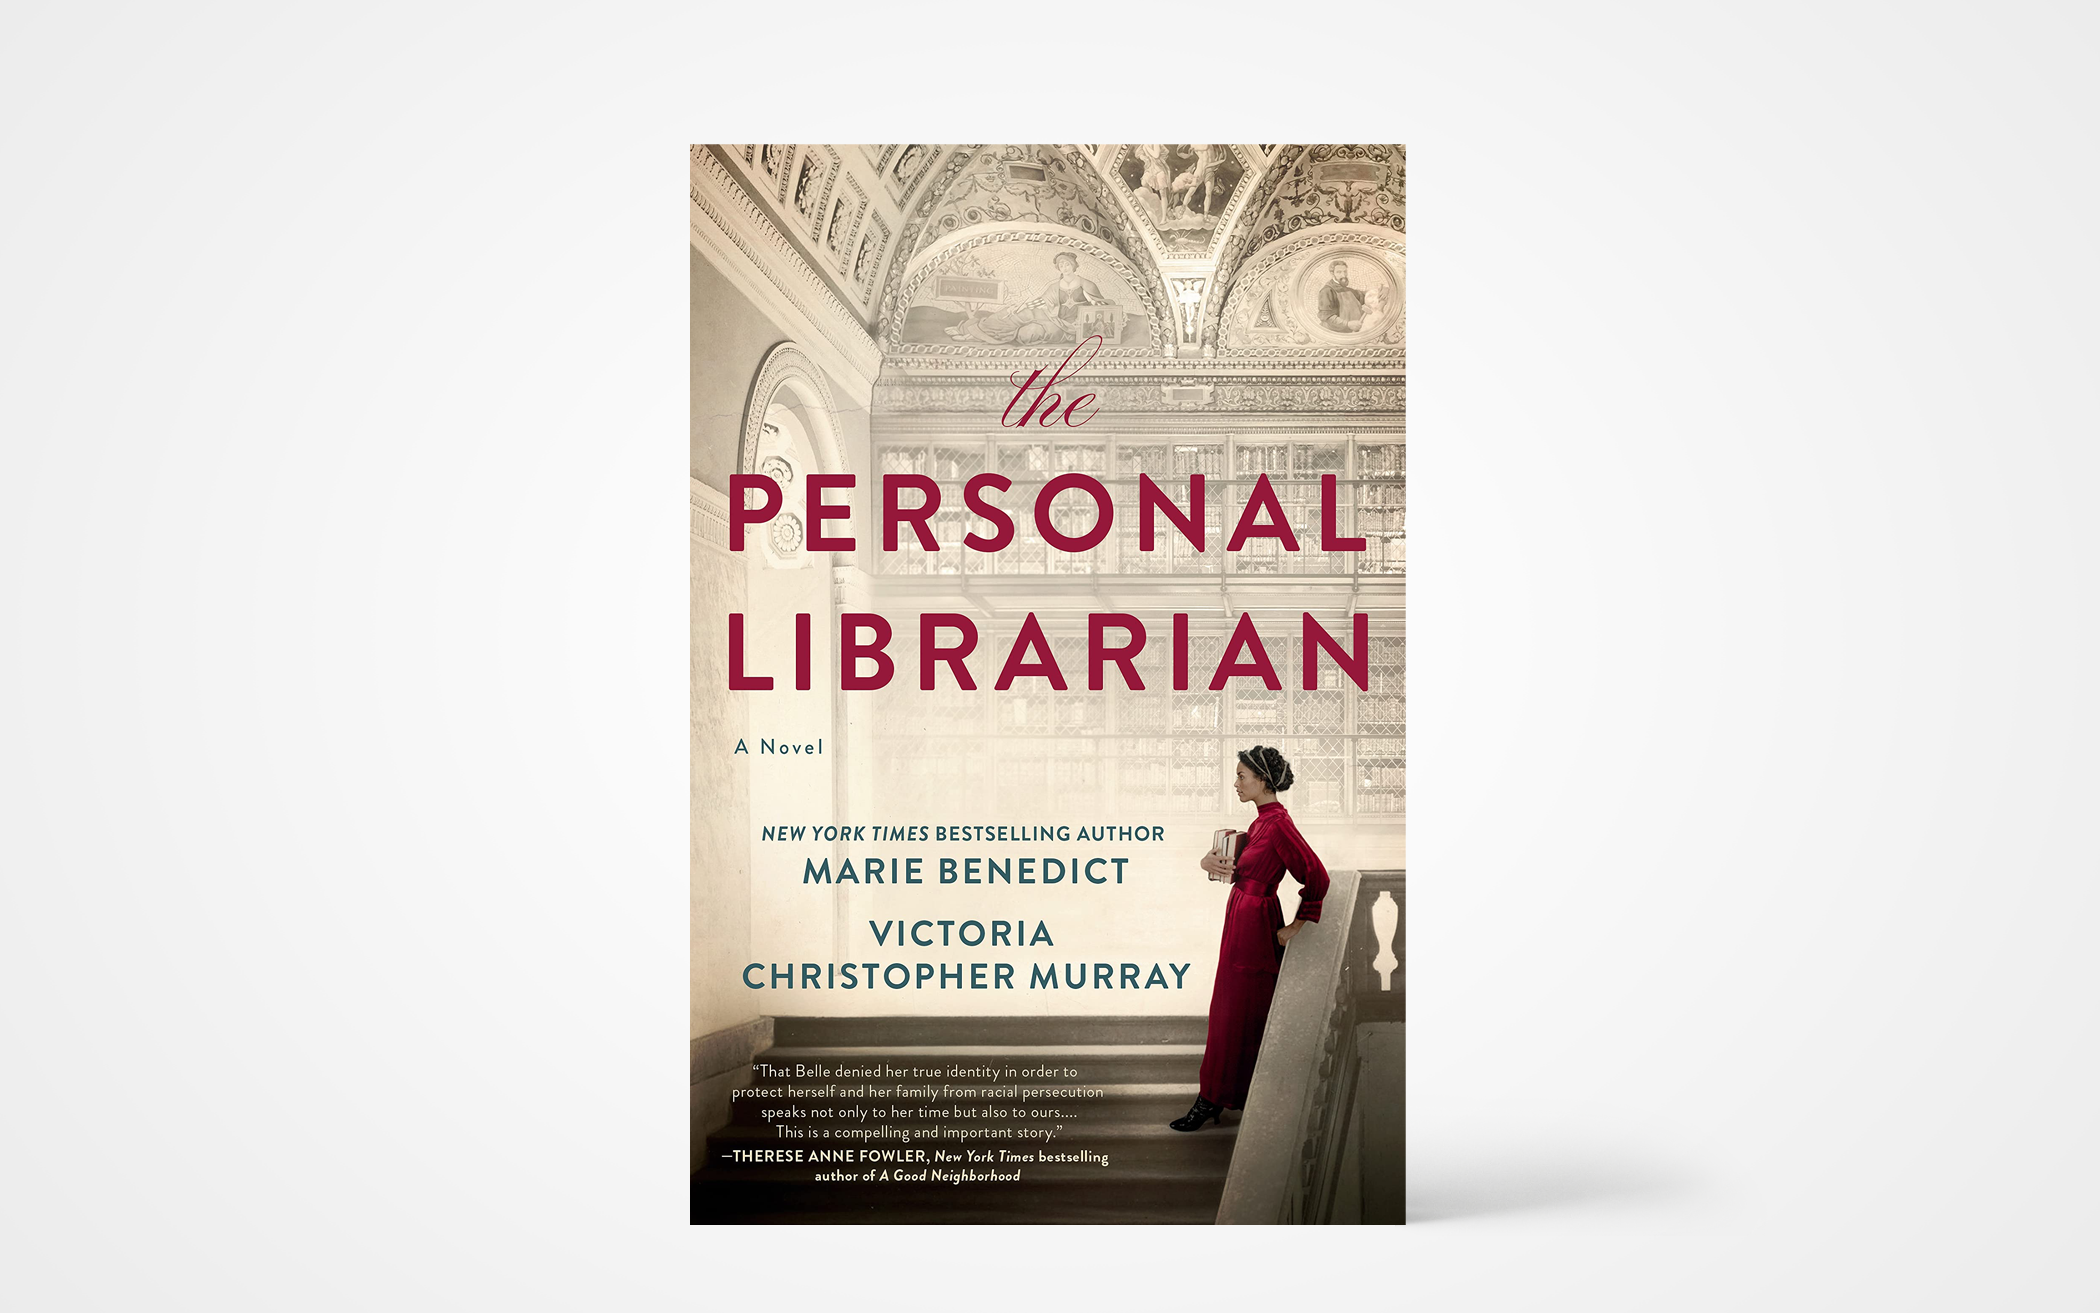 nytimes book review the personal librarian